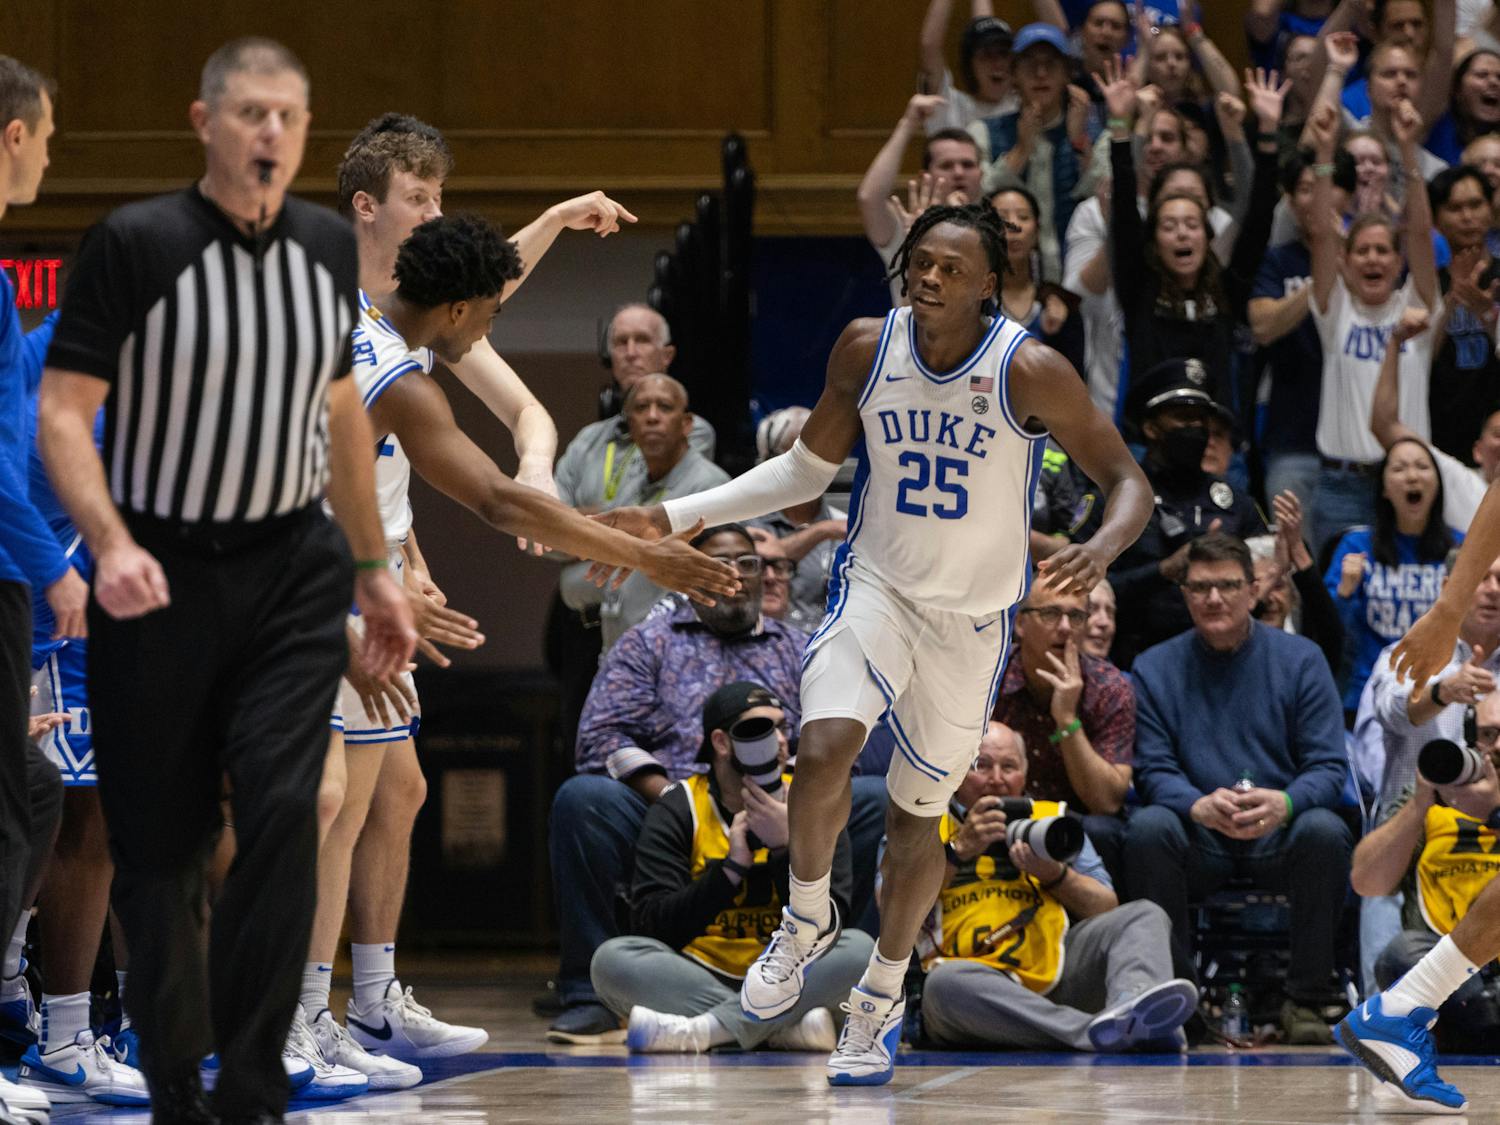 Sophomore forward Mark Mitchell amassed 30 points between Duke's contests against Notre Dame and Boston College last week.